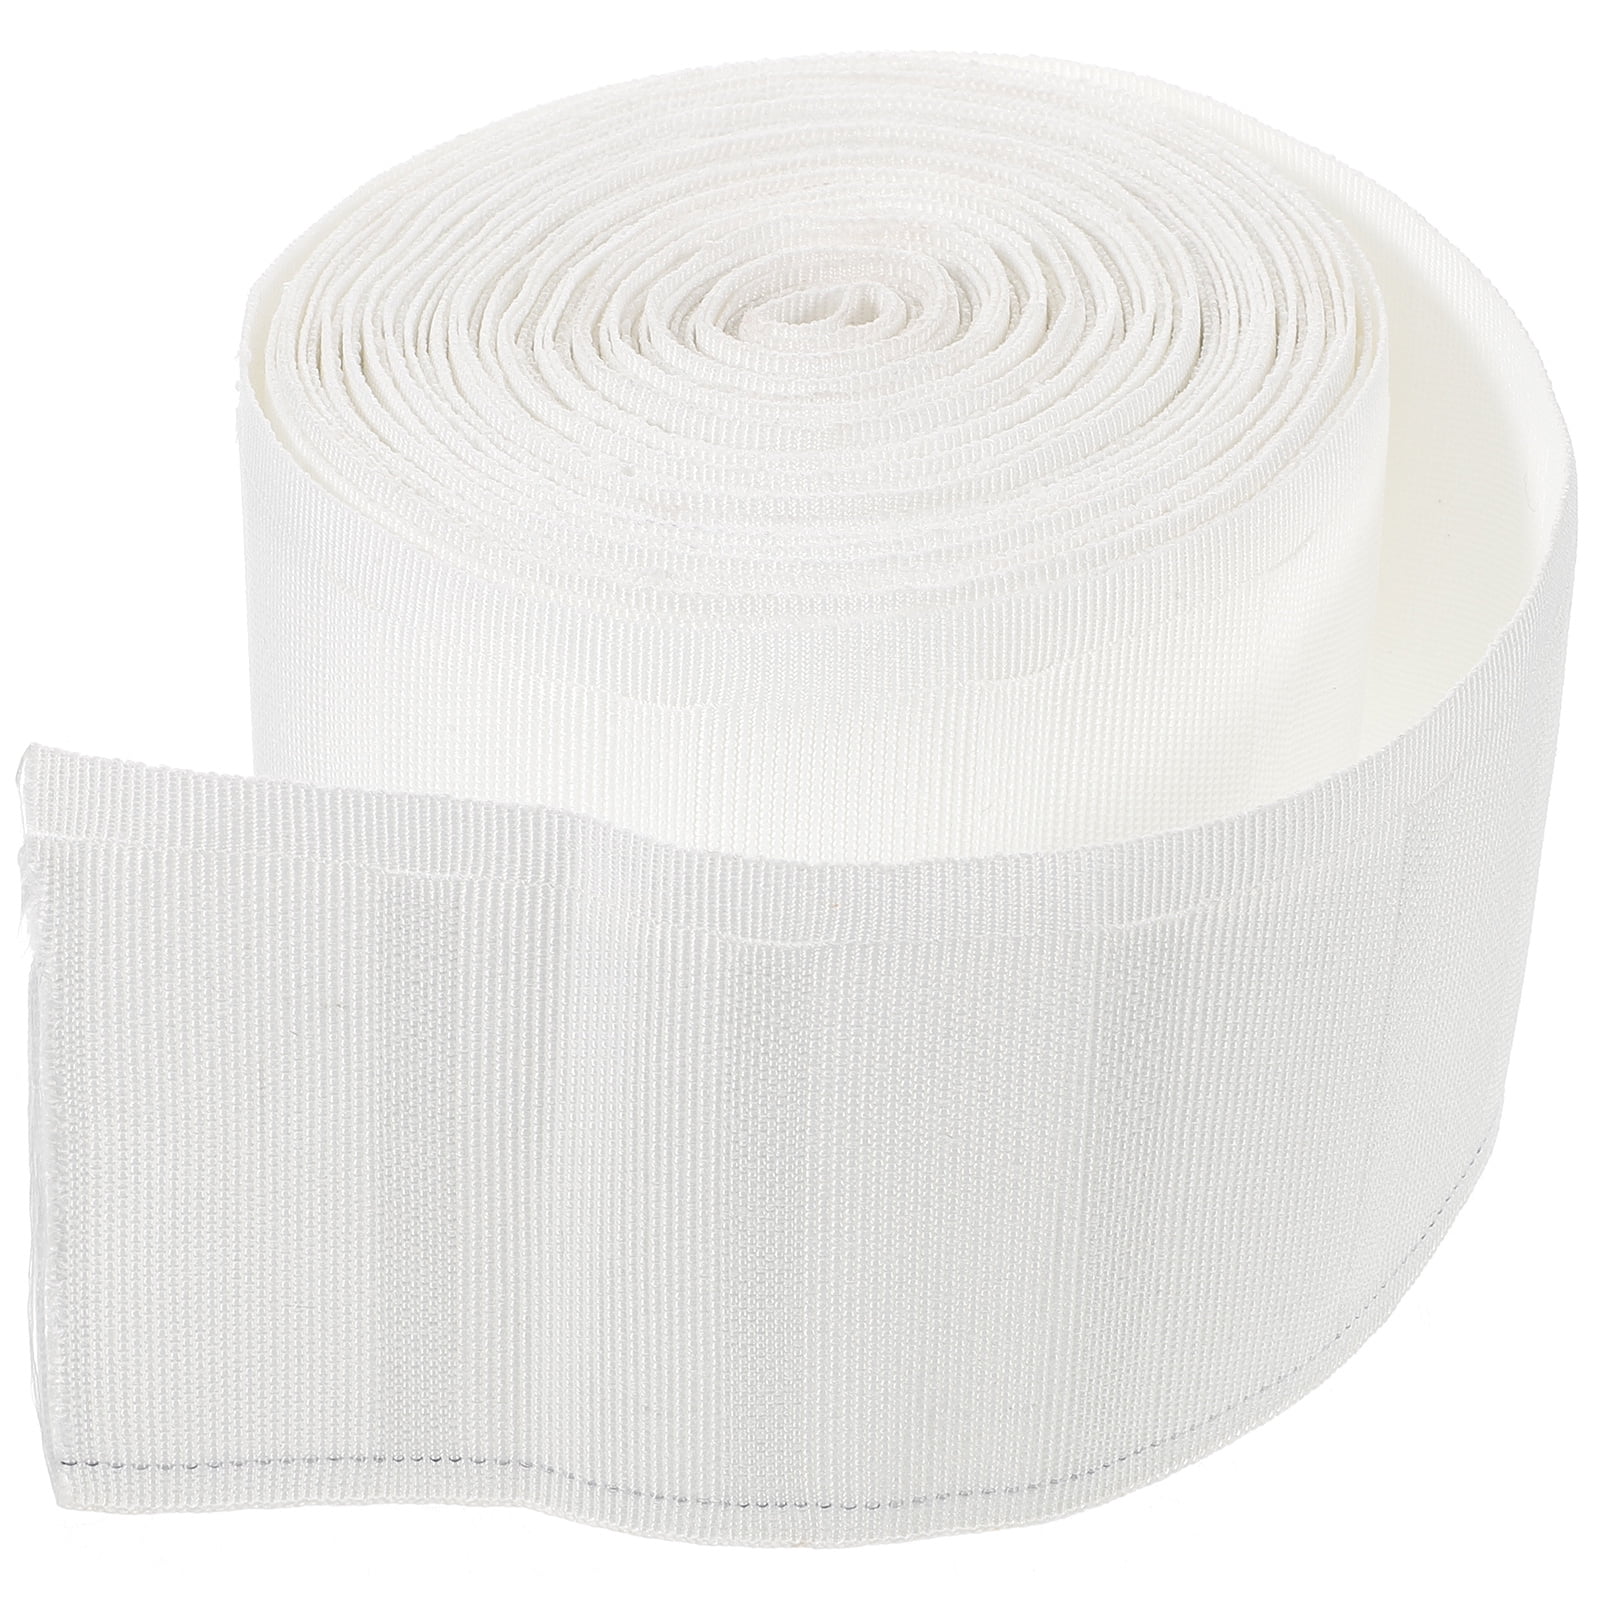 1 Roll White Curtain Pleated Tape 1181.1 Inch, Elastic Tape For Curtains,  Door Curtains And Shower Curtains Home Decor